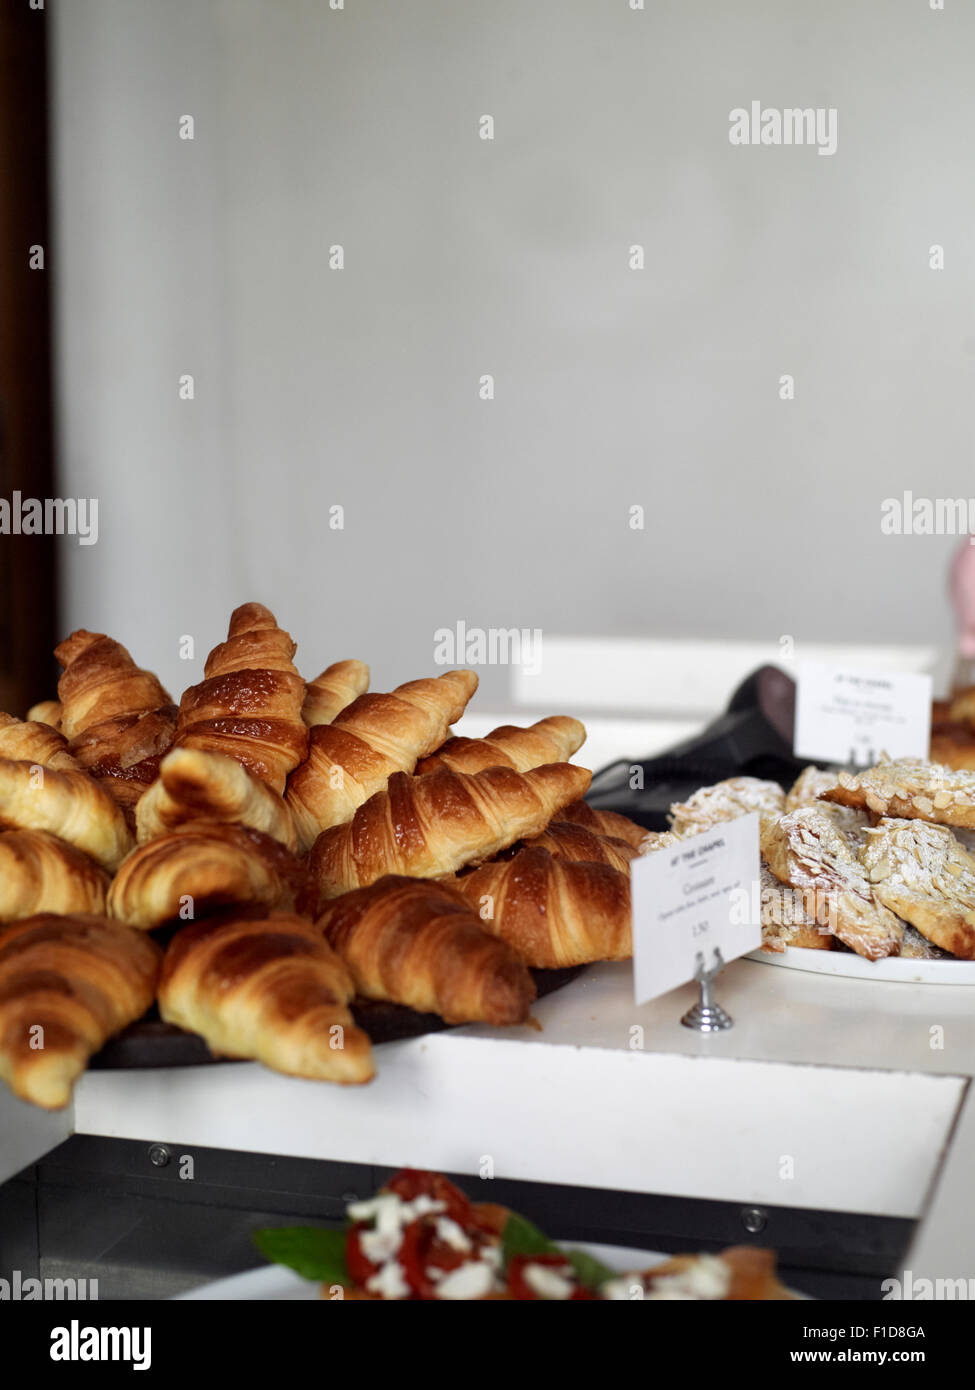 Paitsserie with display of croissasnt and pastries Stock Photo